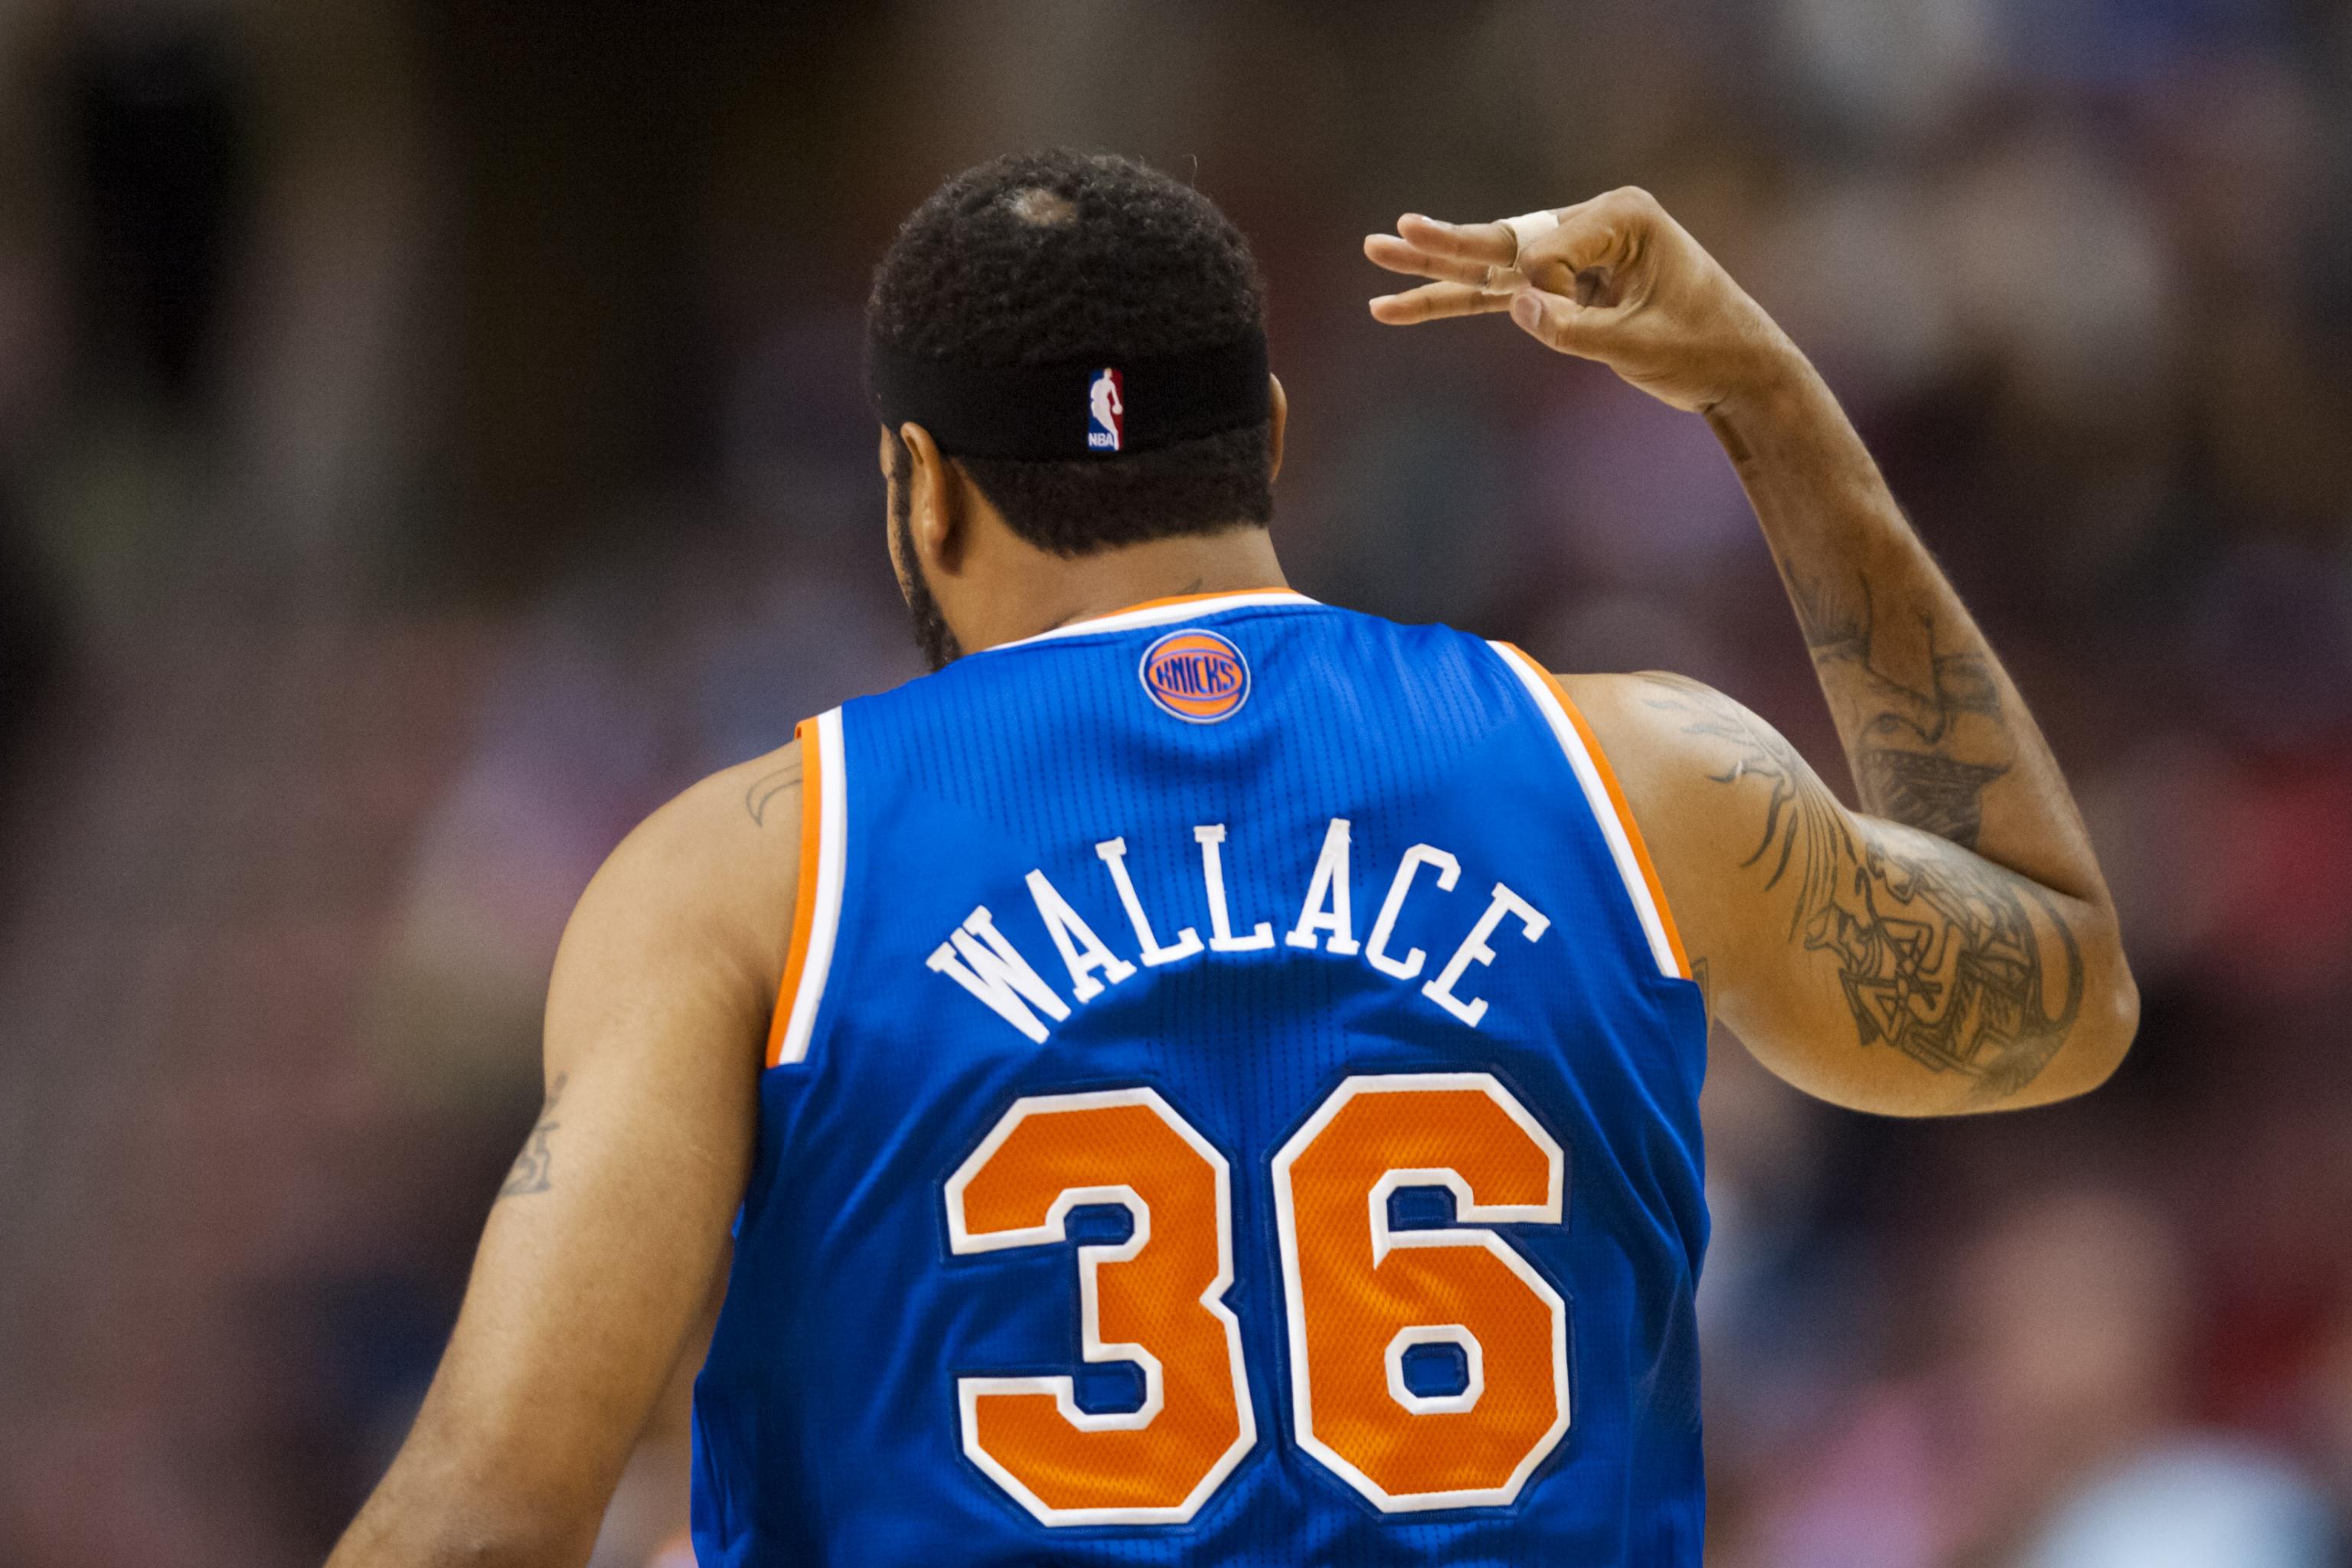 Rasheed Wallace Appears Close to Returning for Knicks - The New York Times